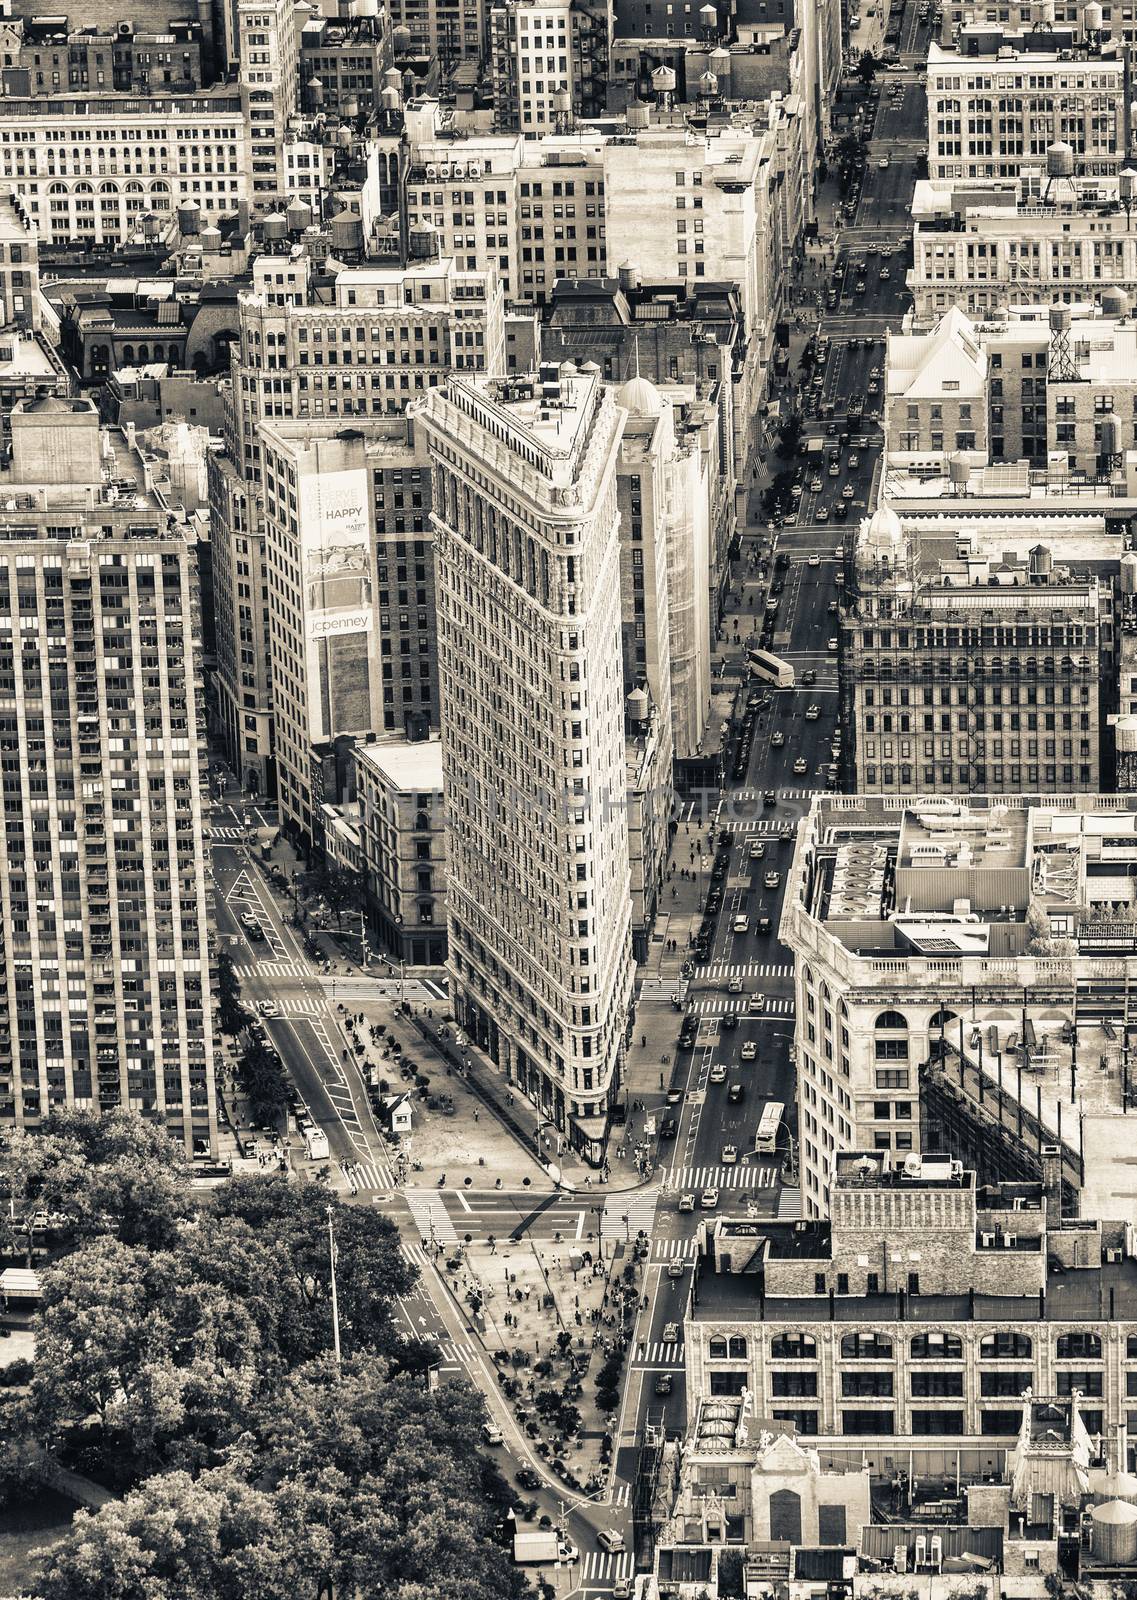 NEW YORK, NY, USA - JUNE 9: Aerial view of Flat Iron building, b by jovannig